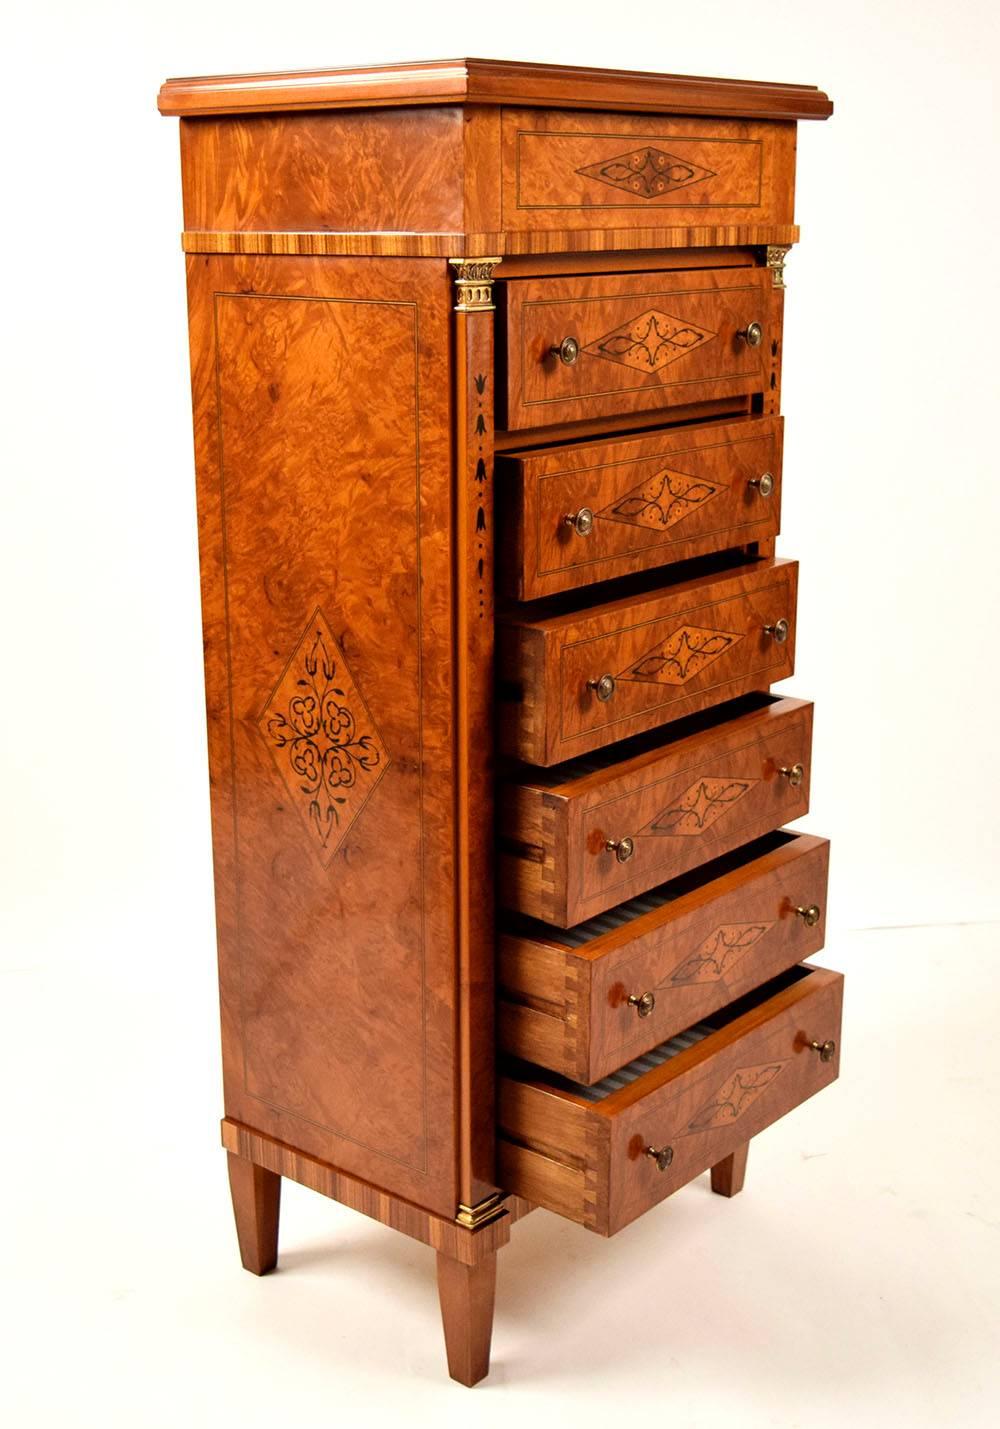 This beautiful 1970s chest of drawers is made of solid wood with beautiful inlaid designs on the top, sides, and on the front of the drawers. The chest features seven drawers and the top drawer uniquely opens from the bottom. The rest of the six